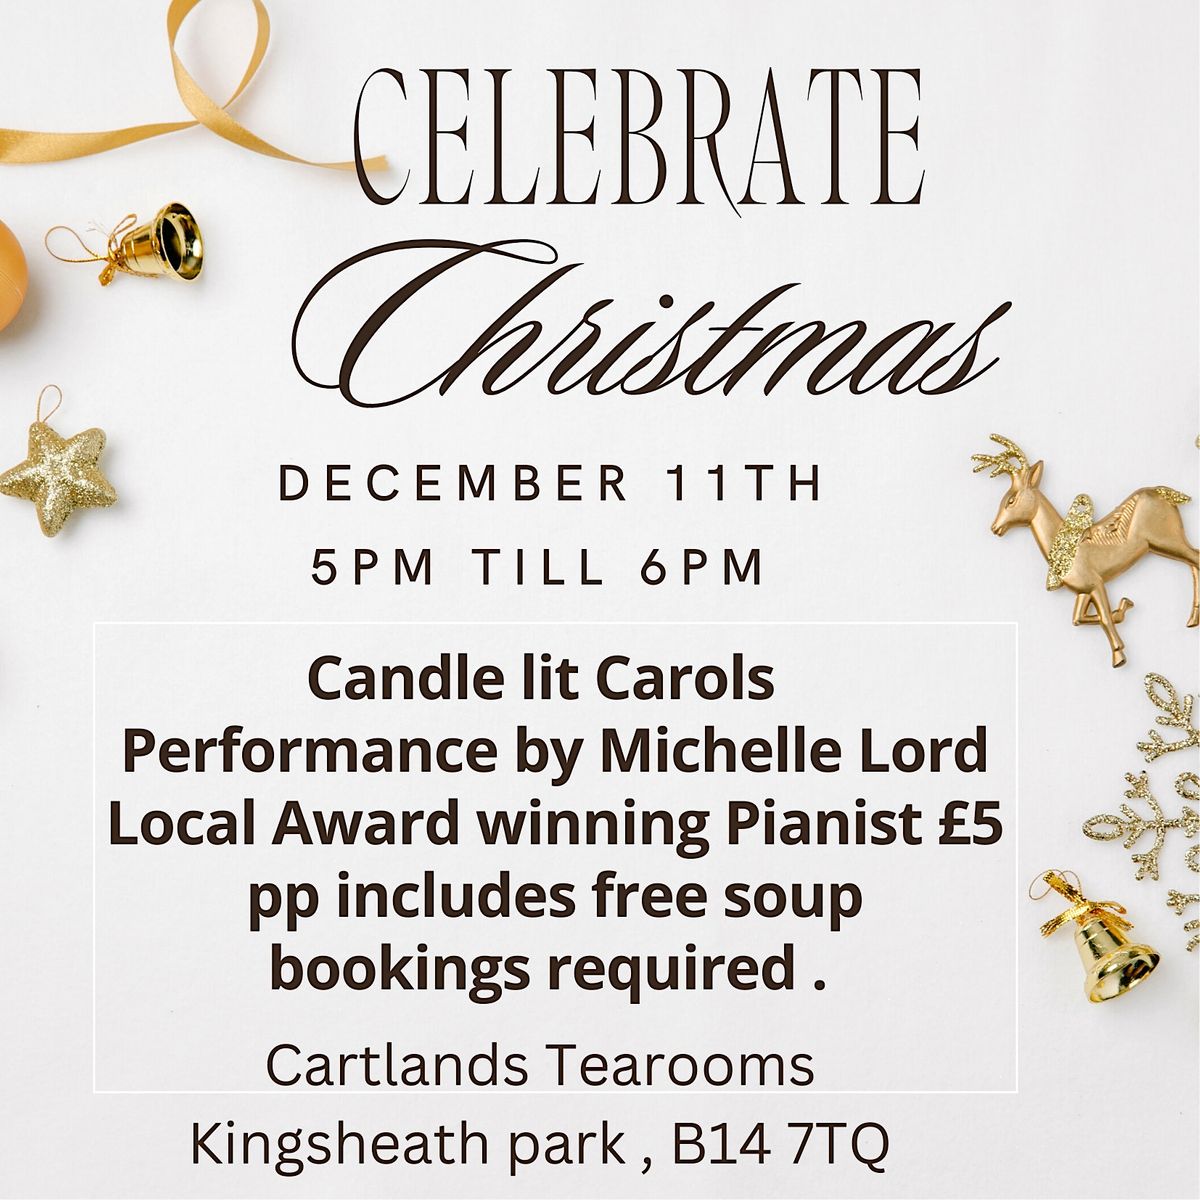 Candle lit carols with Award winning pianist Michelle Lord